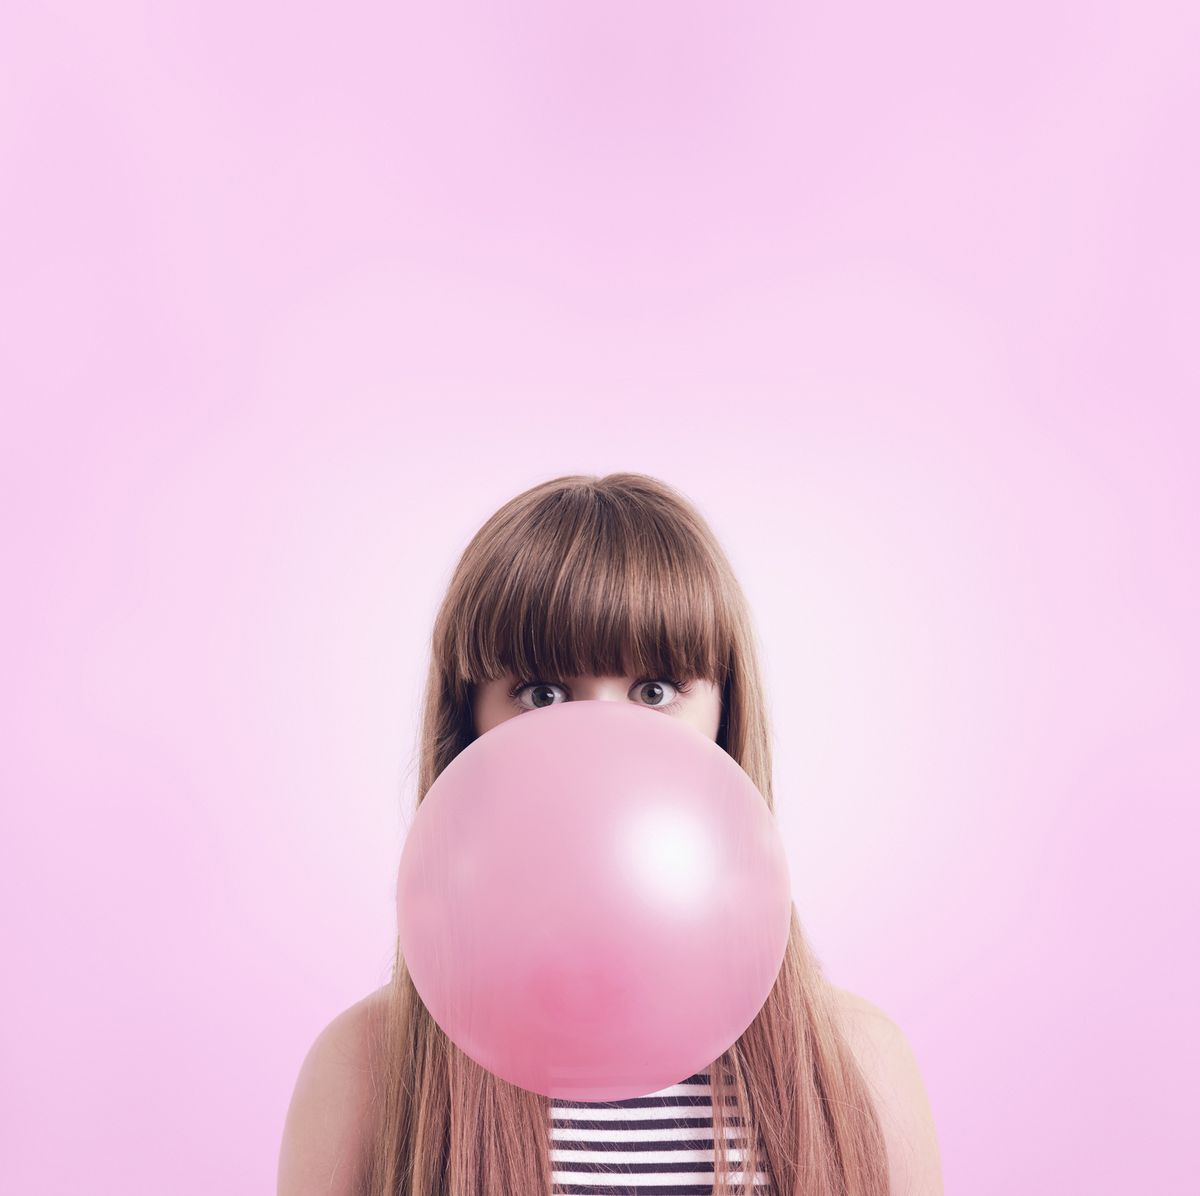 How Does Chewing Gum Affect Your Digestive System?